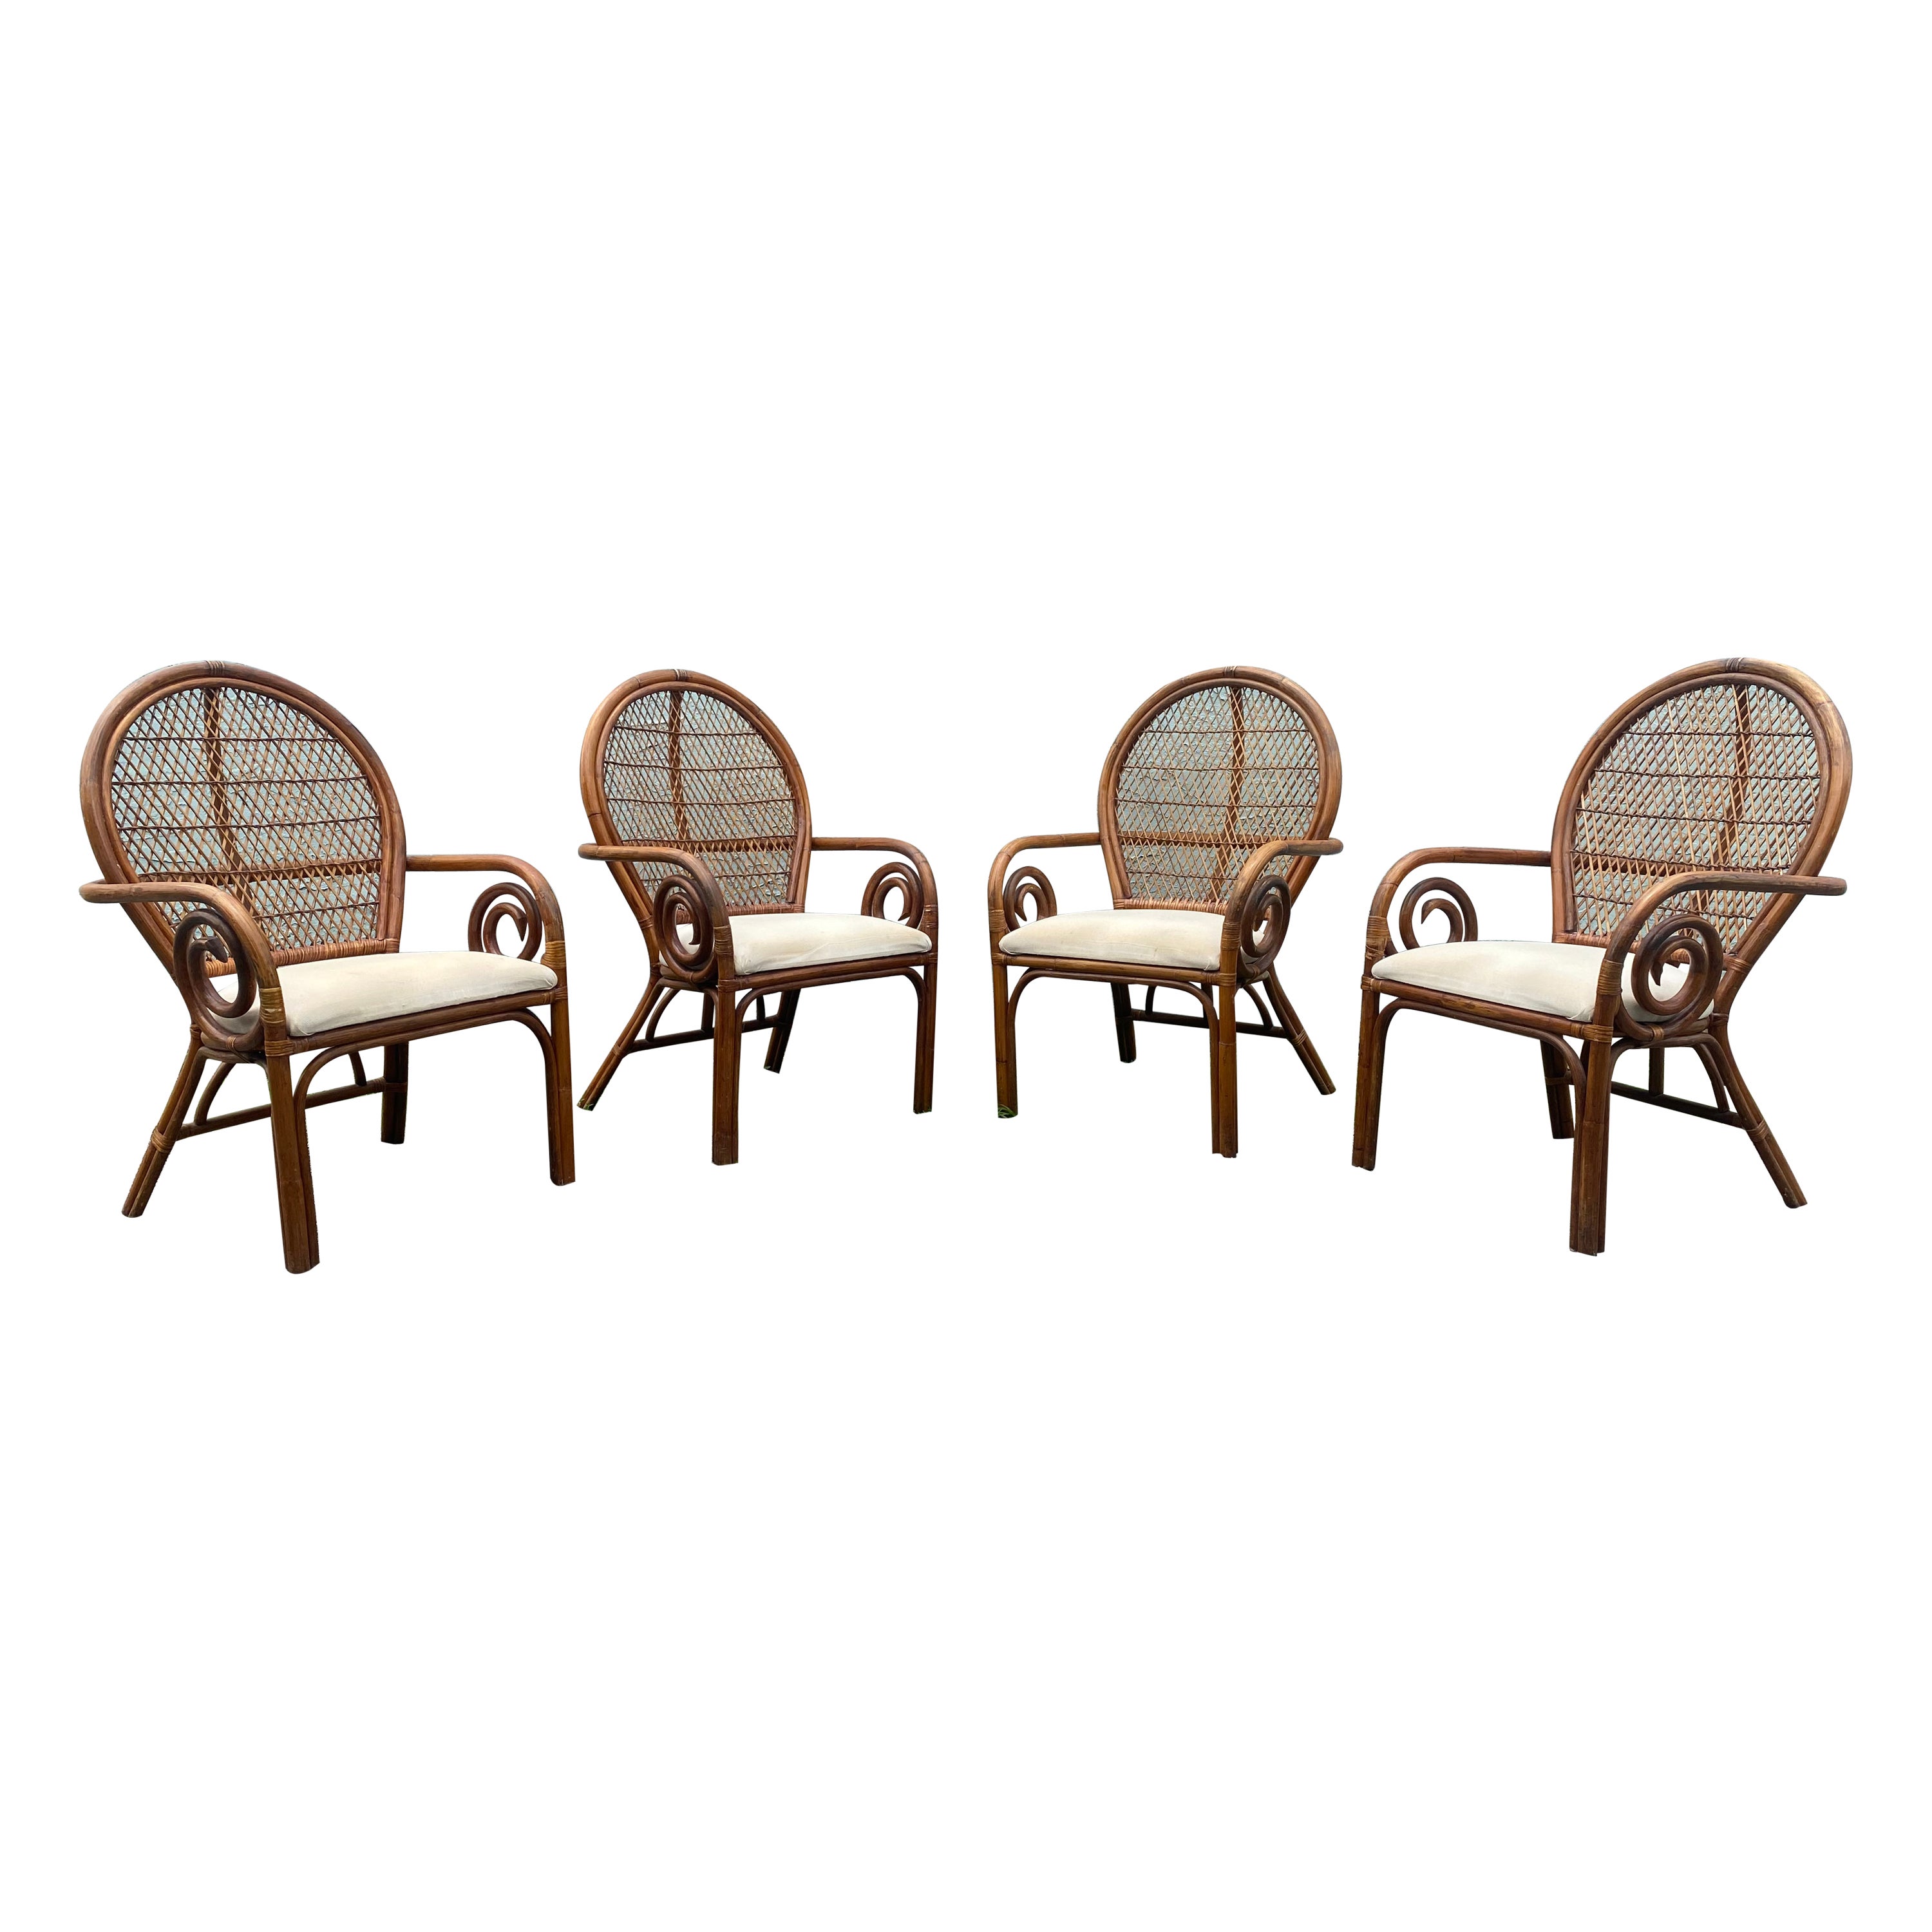 1970s Rattan Peacock Scroll Arm Sculptural Dining Side Chairs